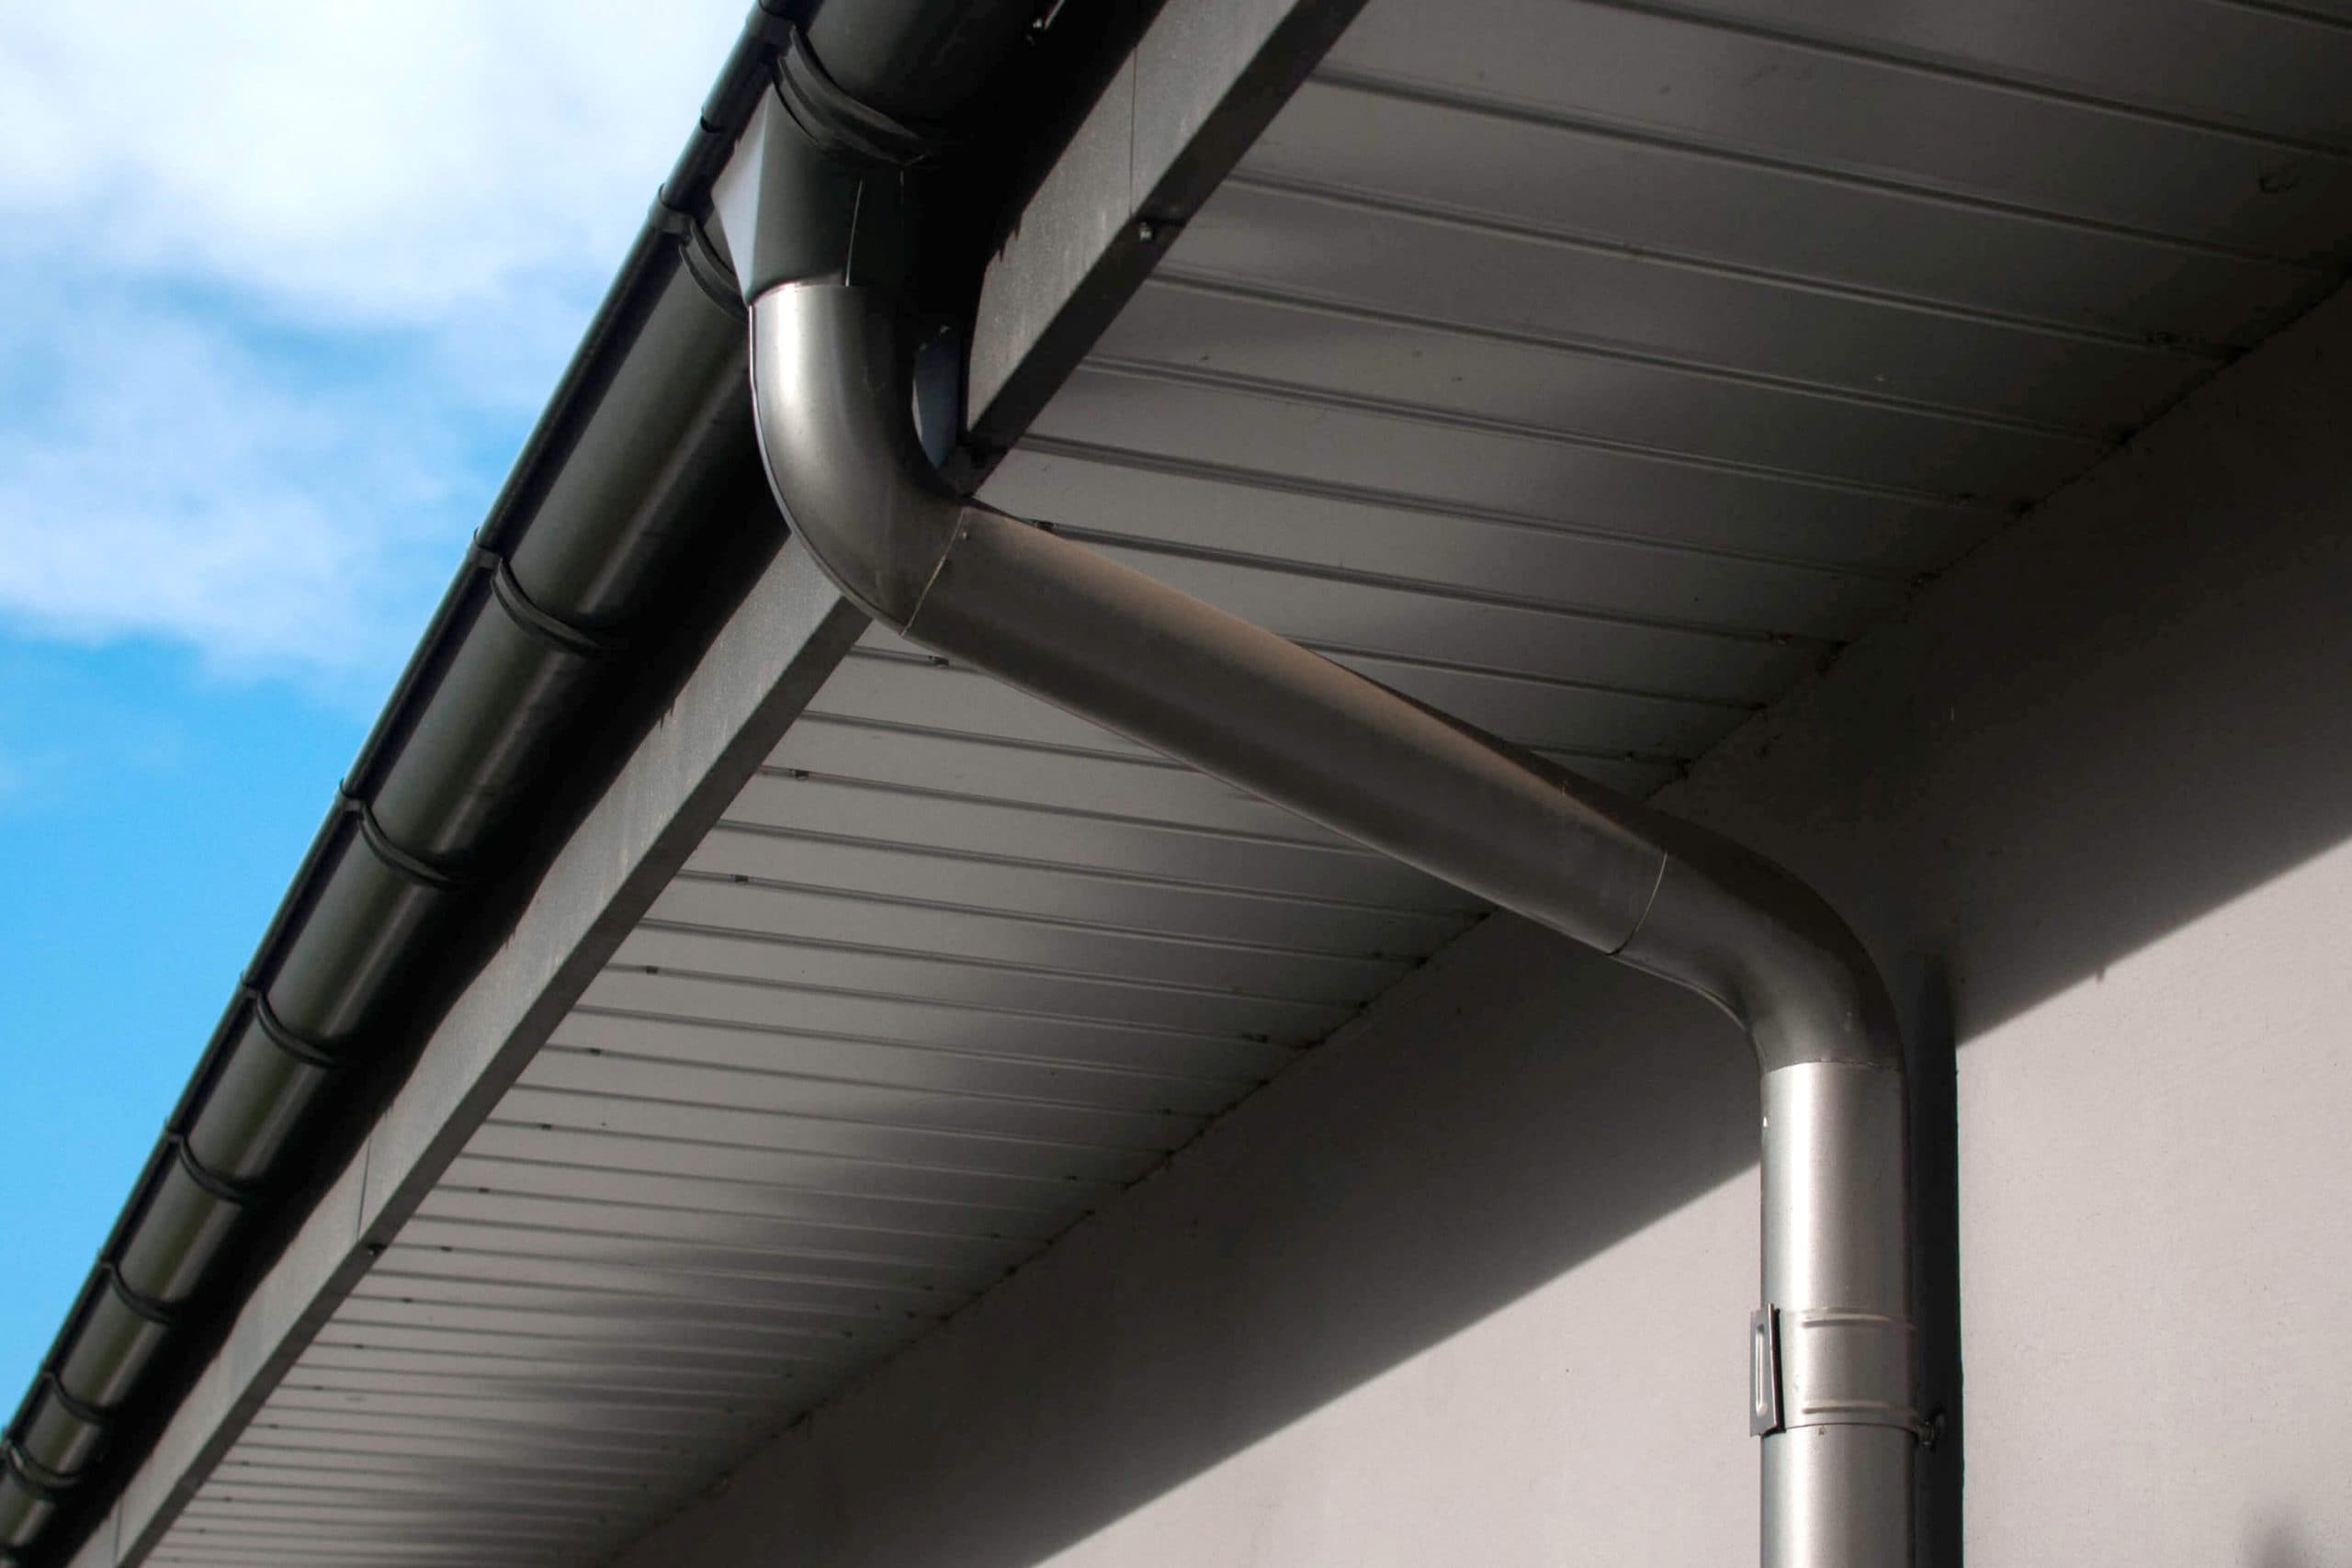 Corrosion-resistant galvanized gutters installed on a commercial building in Douglasville